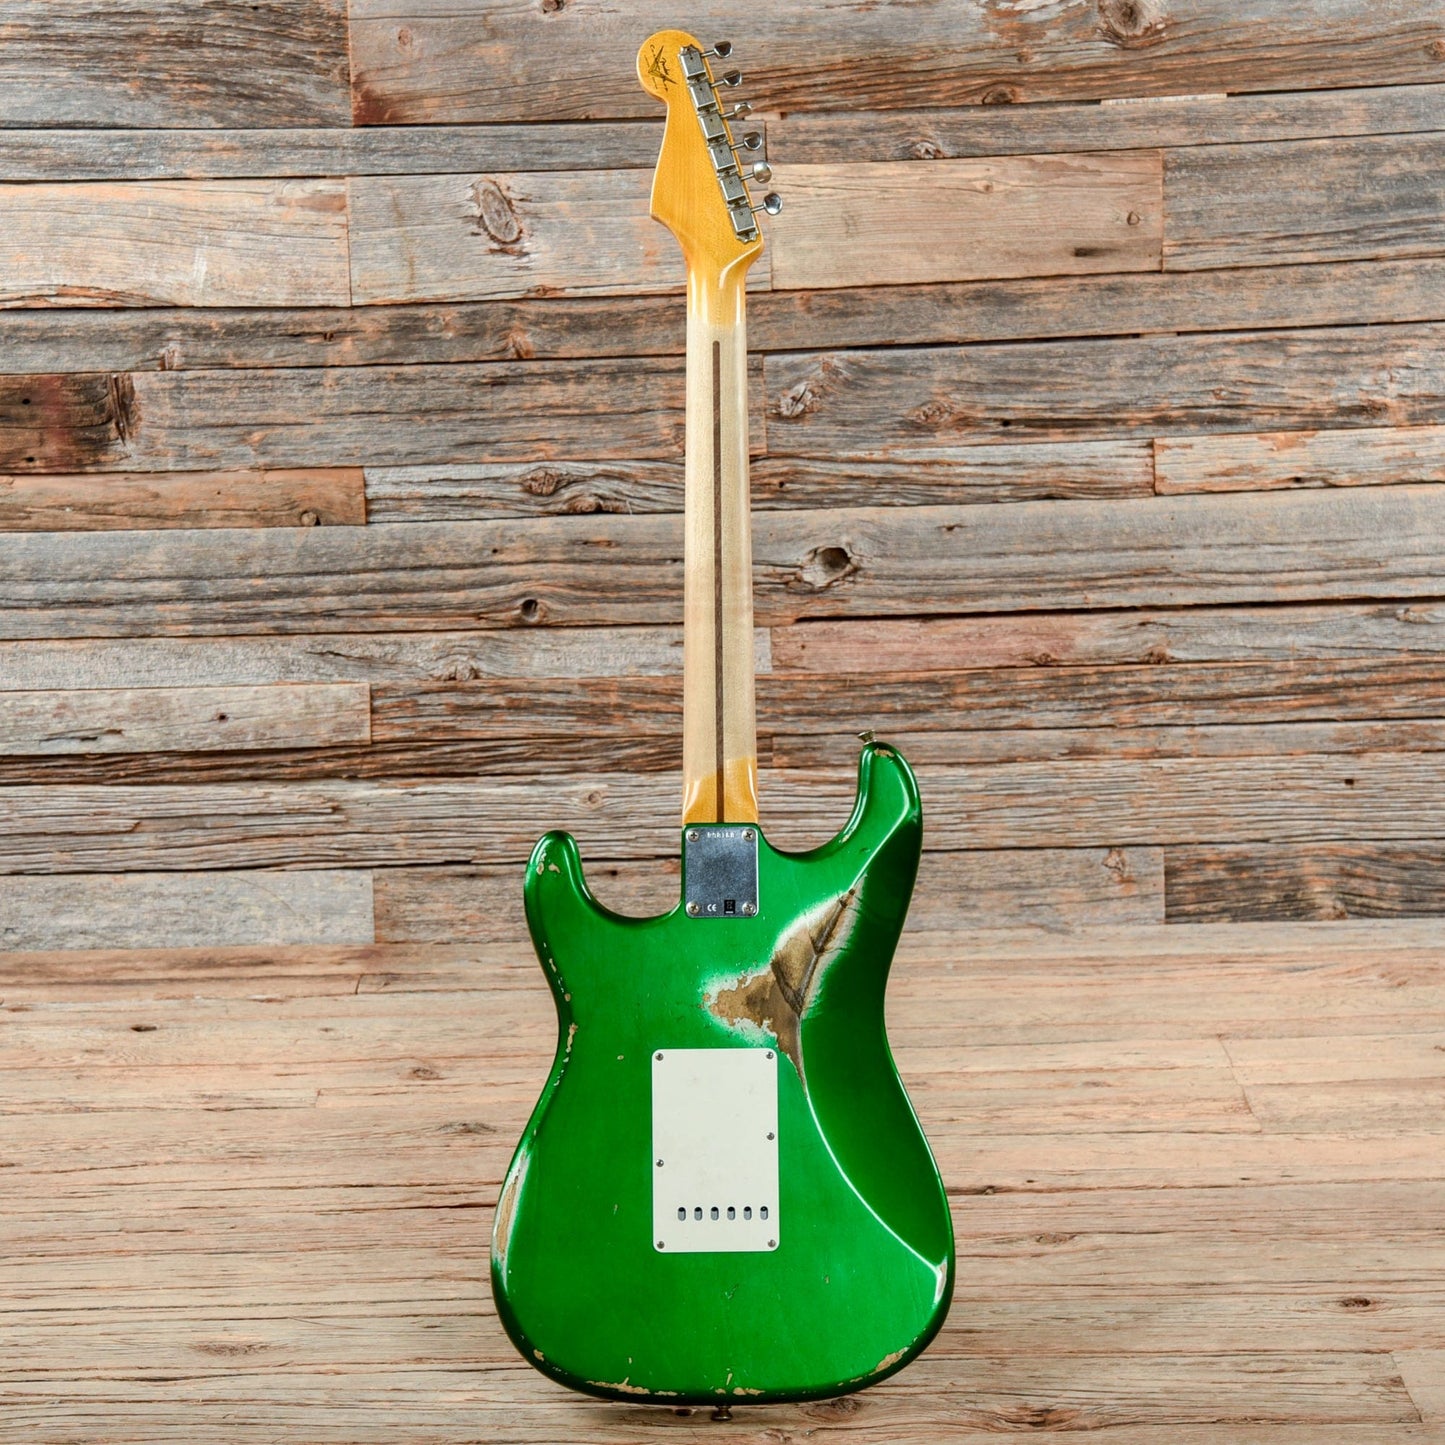 Fender Custom Shop Wildwood 10 1955 Stratocaster Heavy Relic Cadillac Green 2019 Electric Guitars / Solid Body